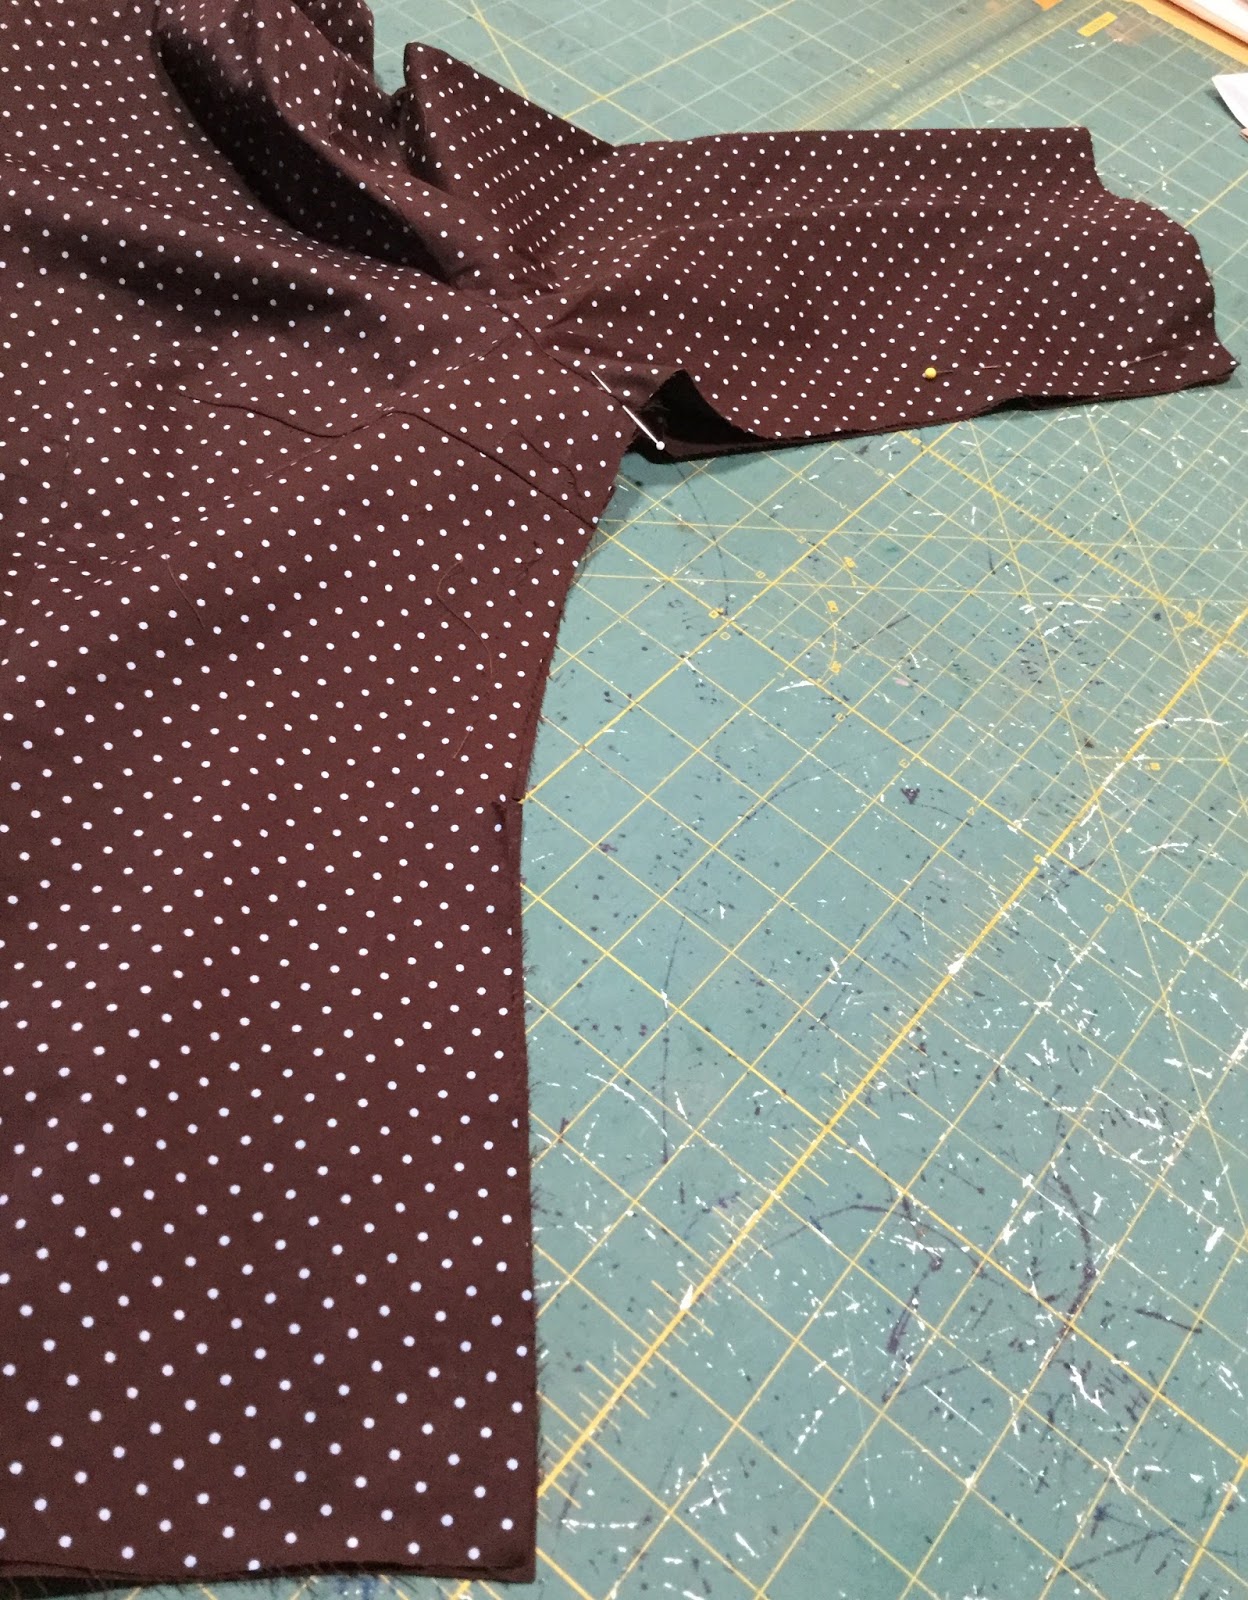 Sewsuccessful: Flat Sleeve Construction Method for a Woven Shirt Tutorial